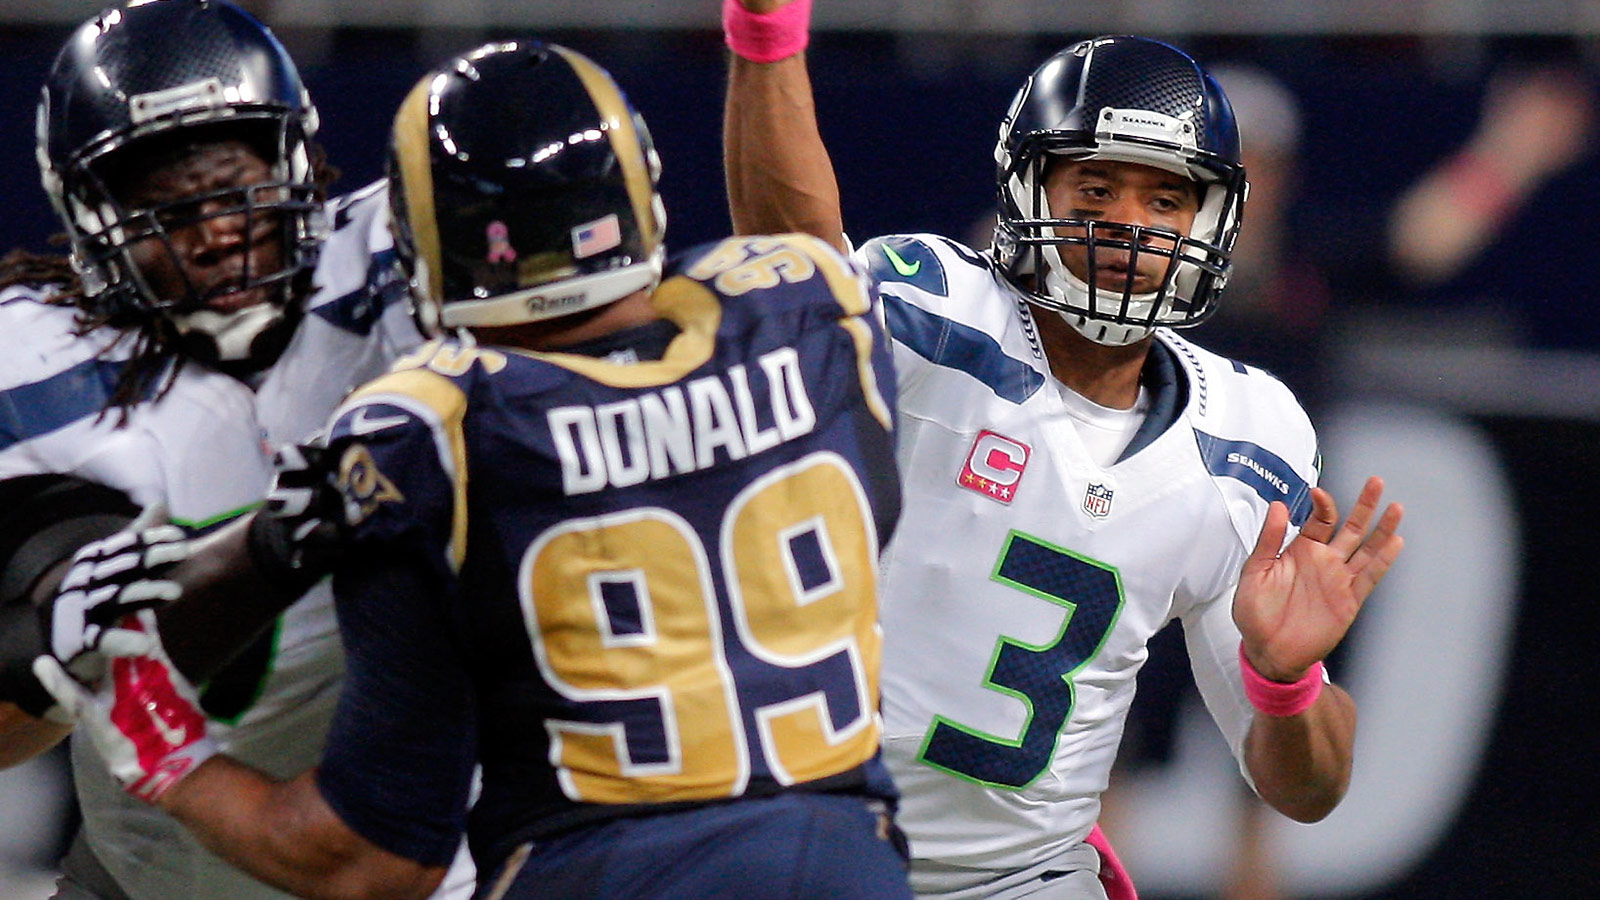 NFL: Seattle Seahawks at St. Louis Rams